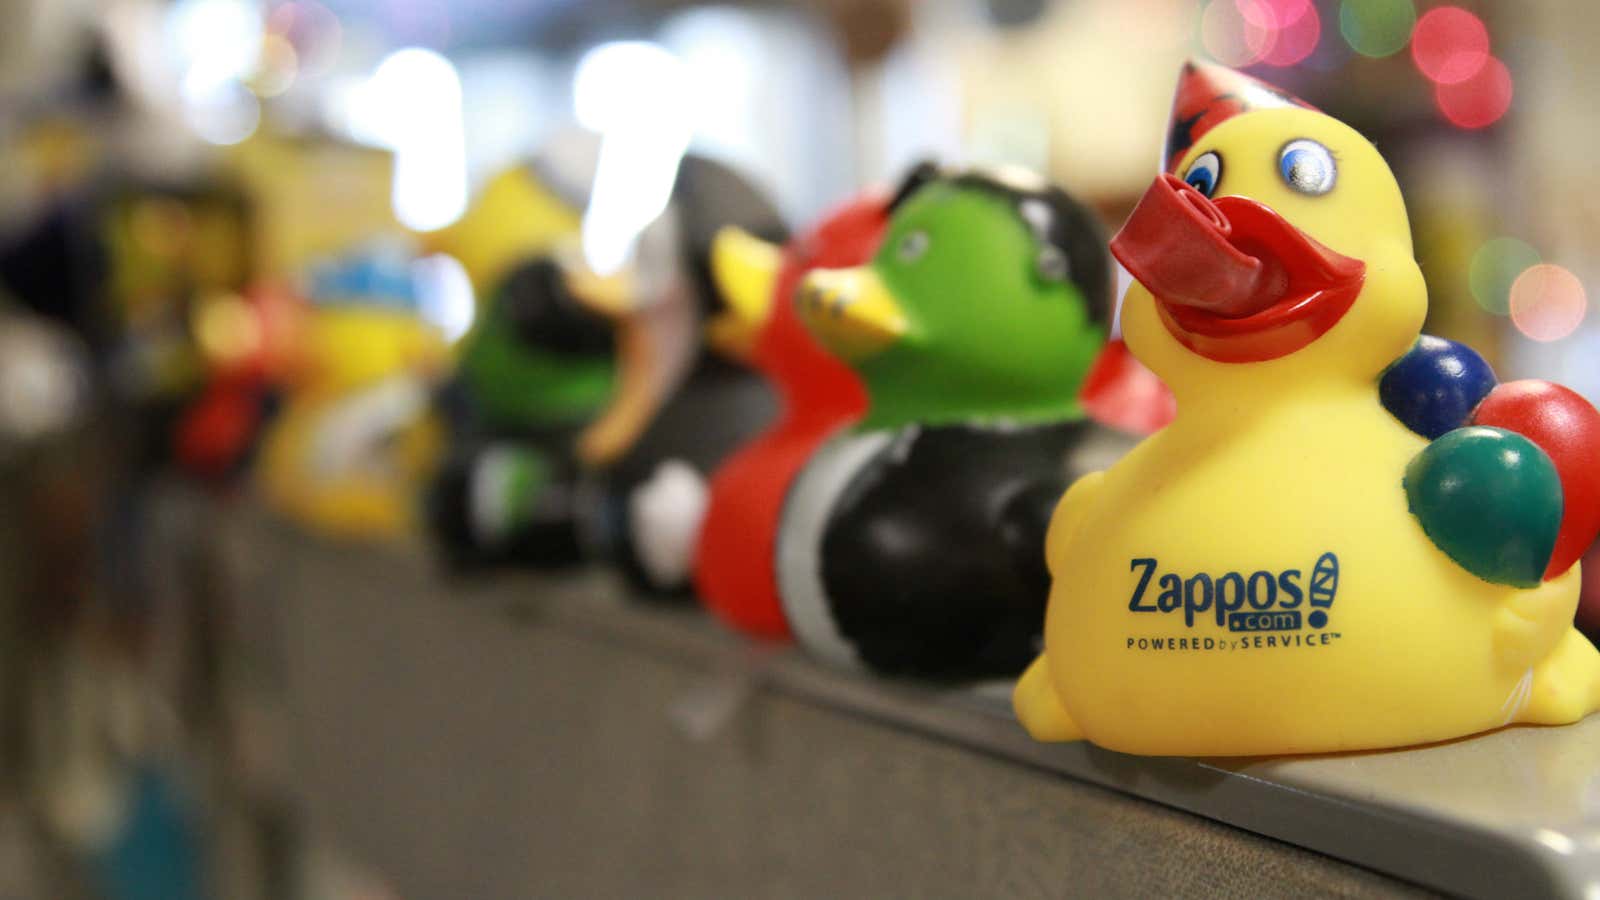 Zappos is trying to get its ducks in a row.